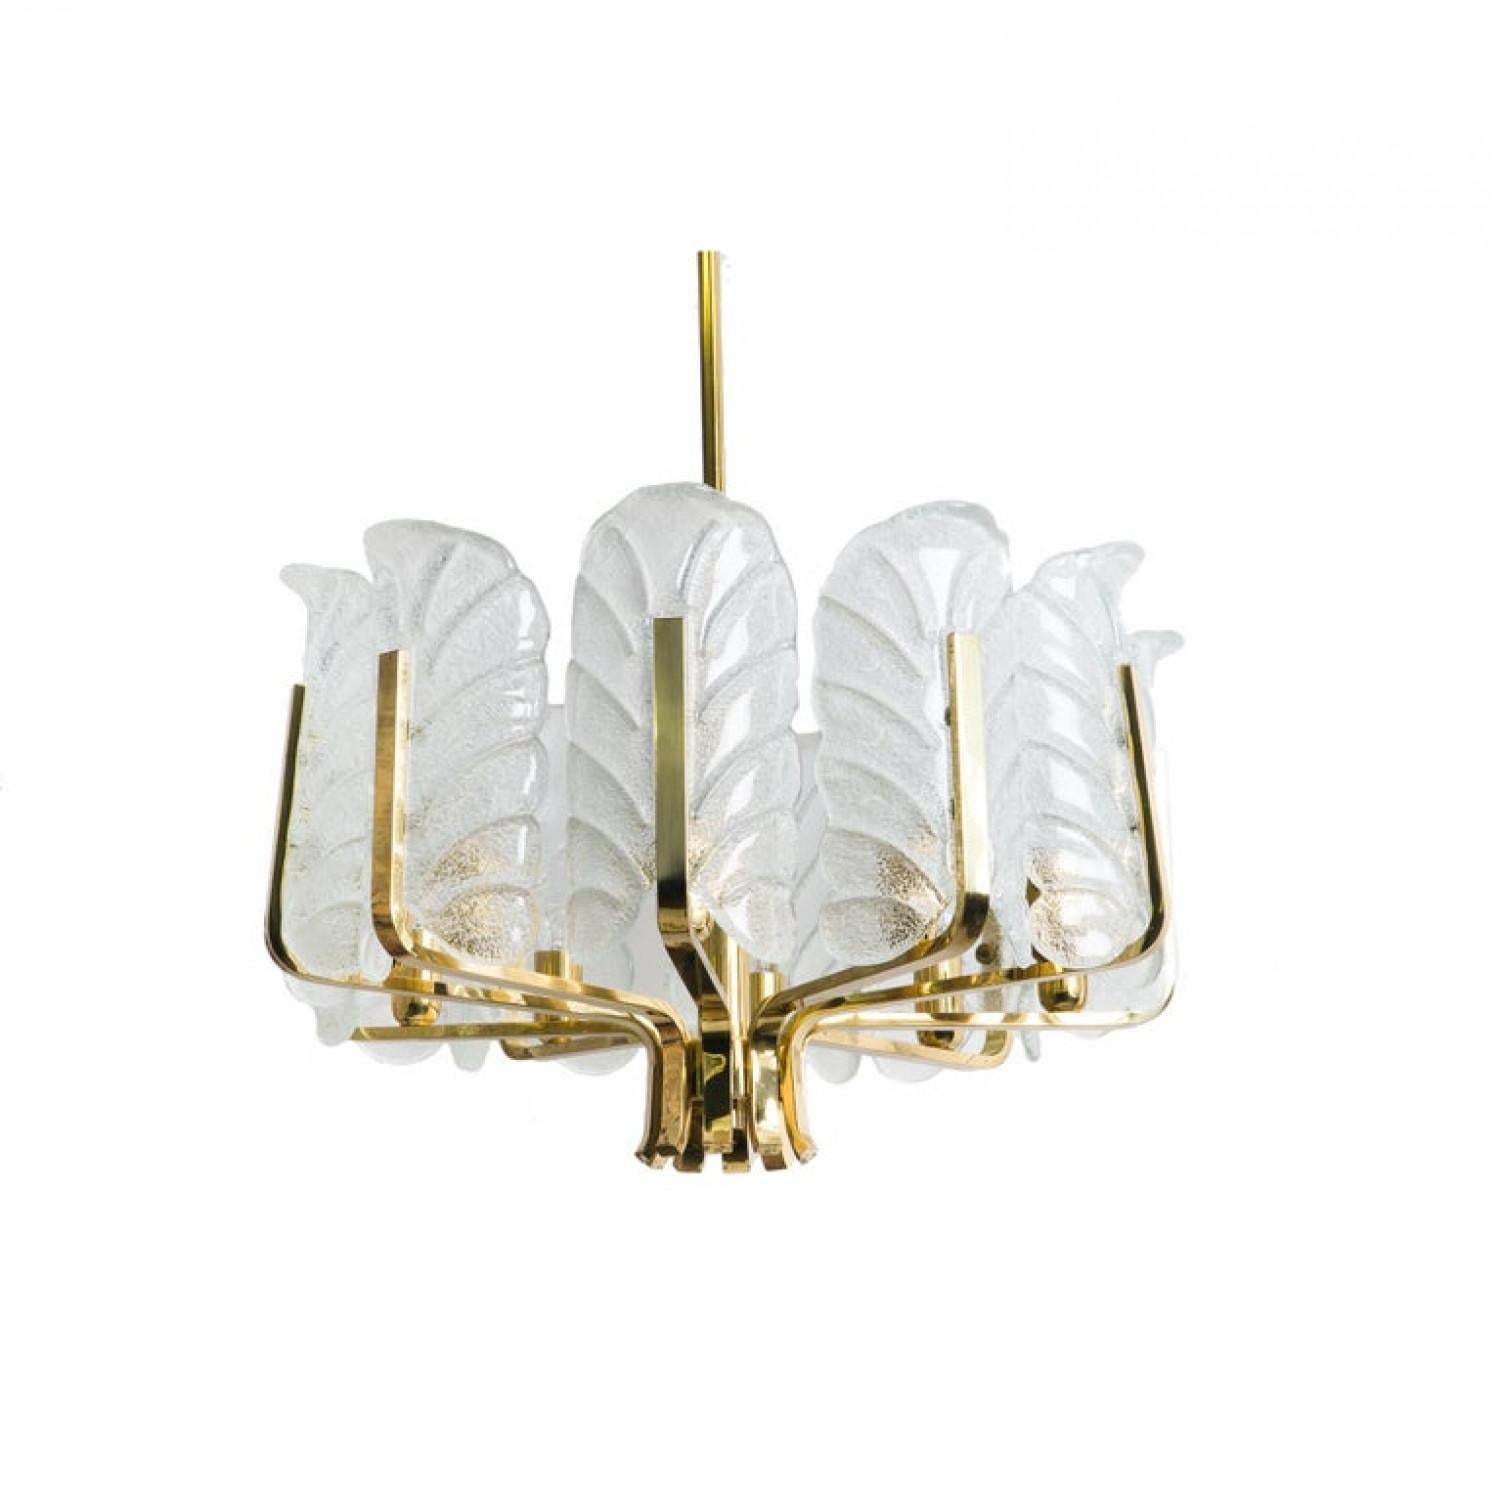 Other One of the Six Large Fagerlund Glass Leaves Brass Chandelier by Orrefors, 1960s For Sale